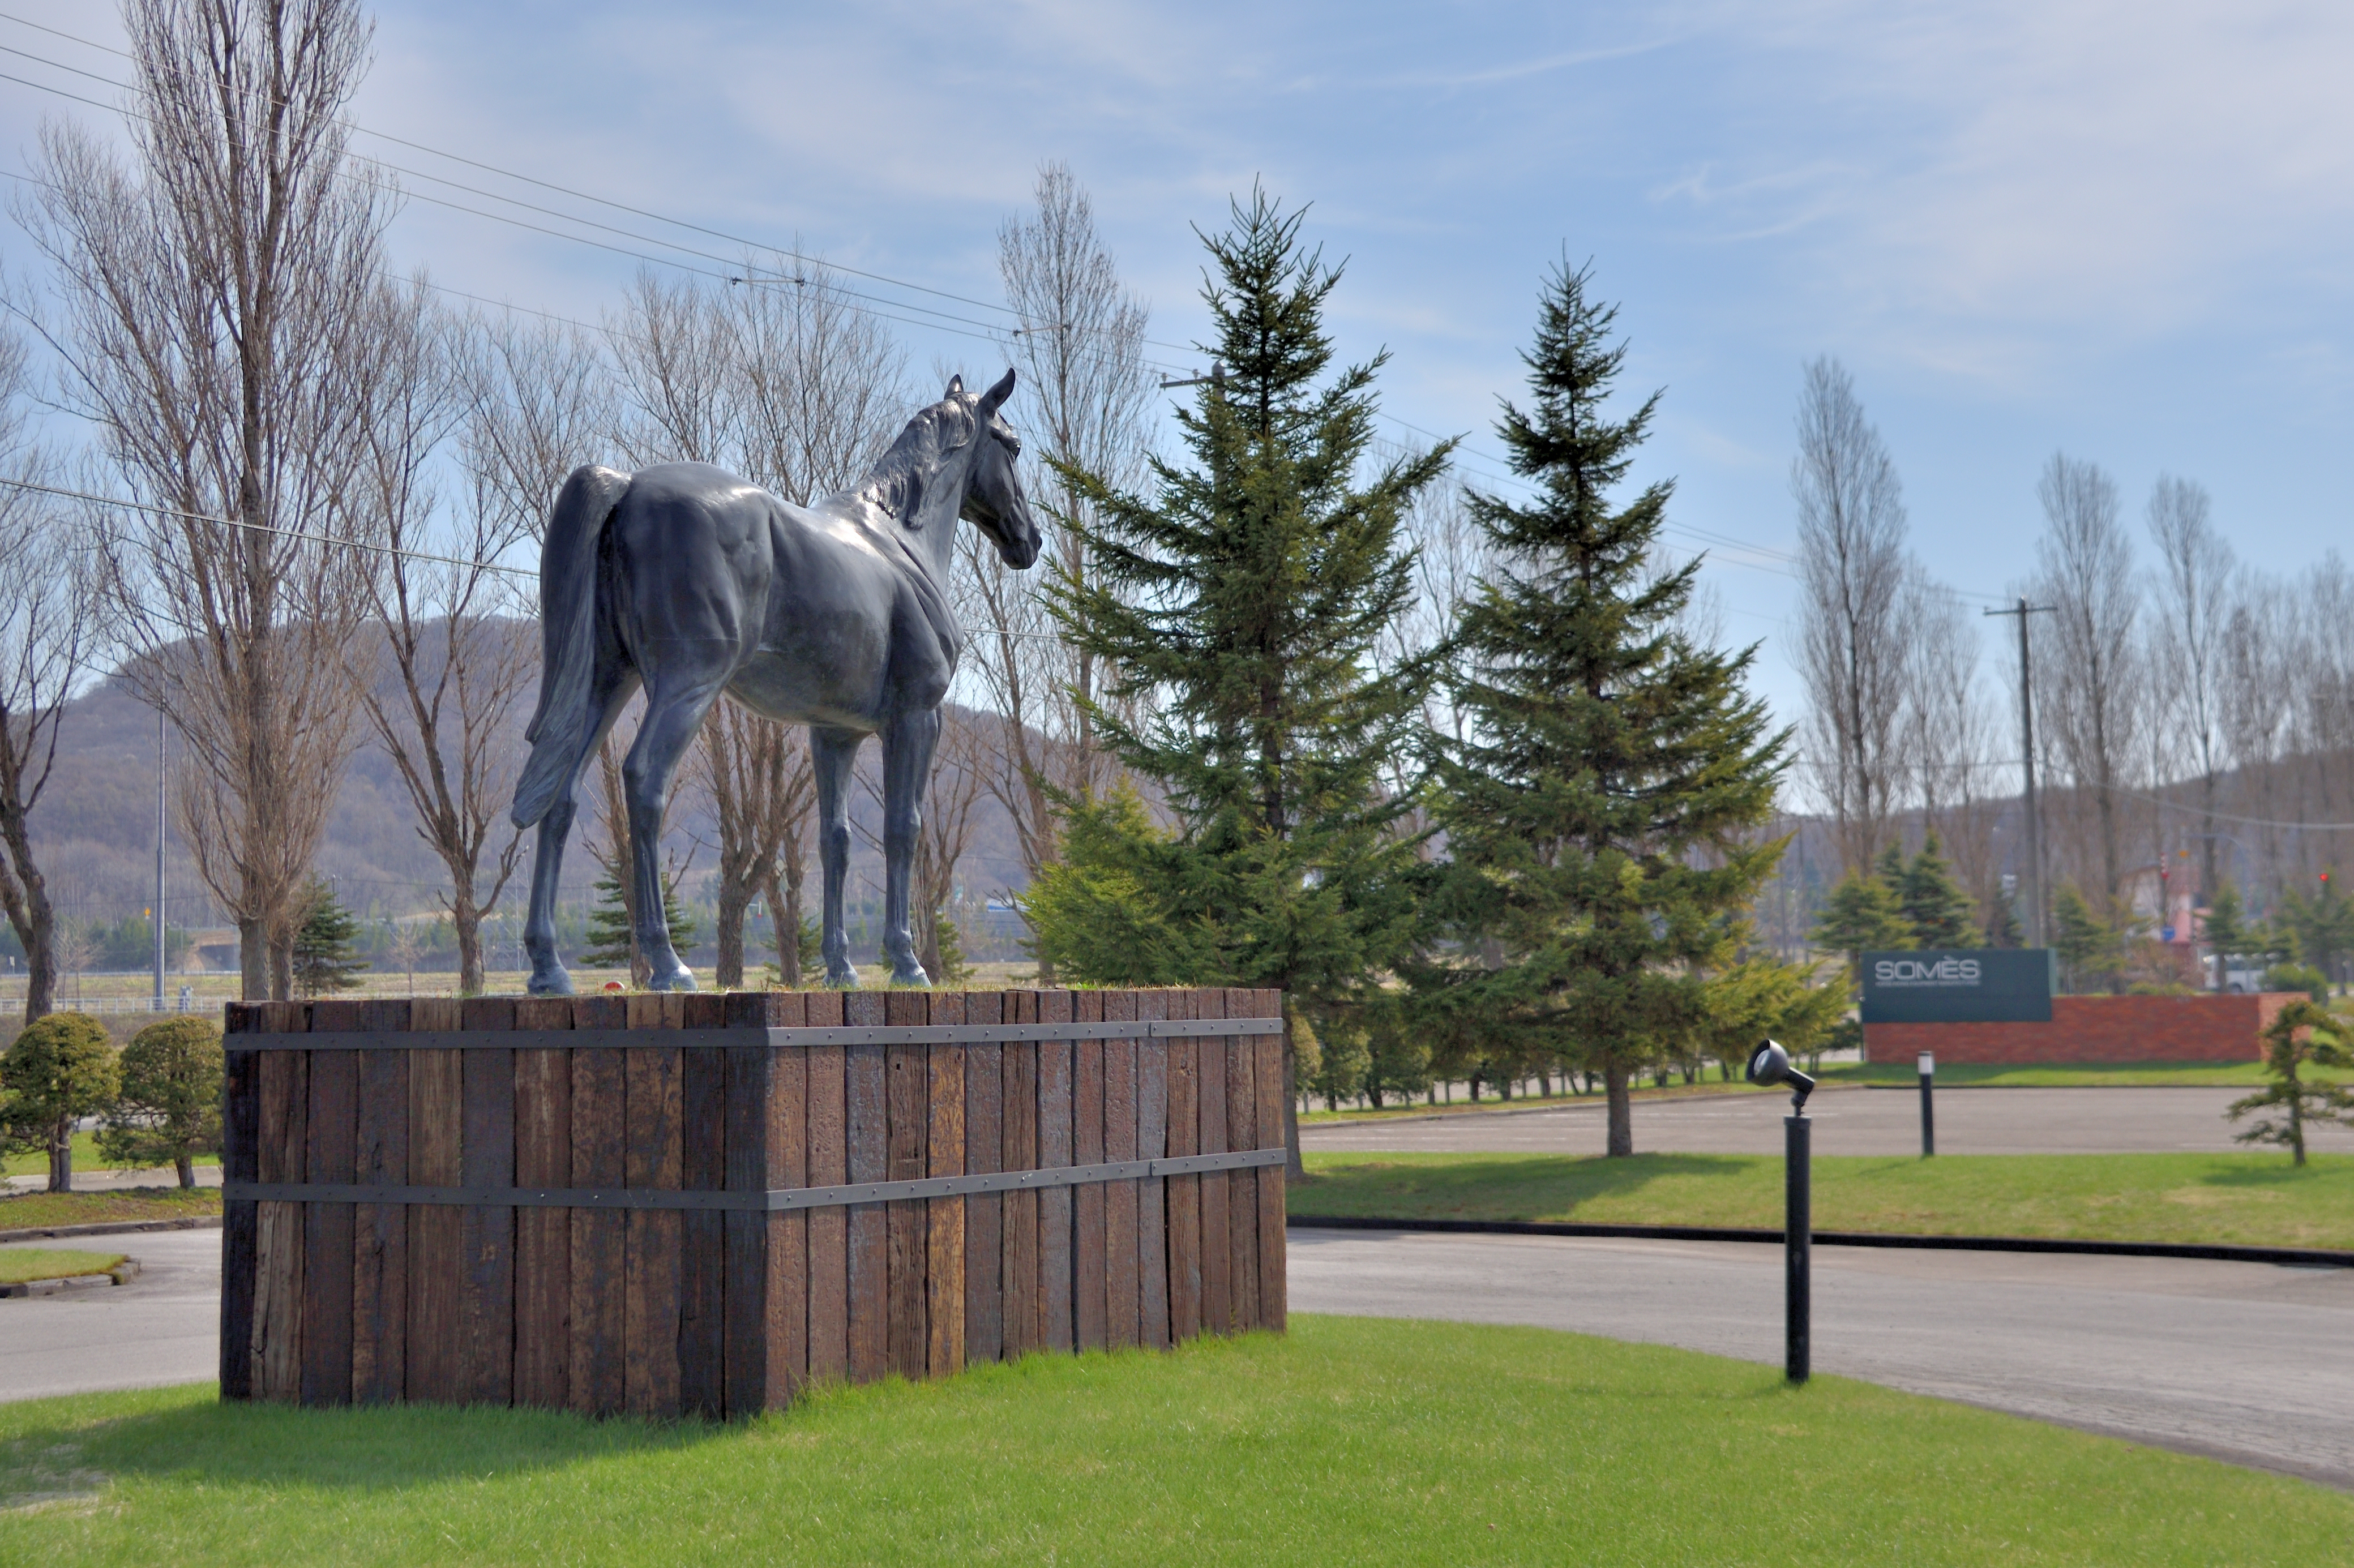 The statue of horse in Somes Saddle Sunagawa factory